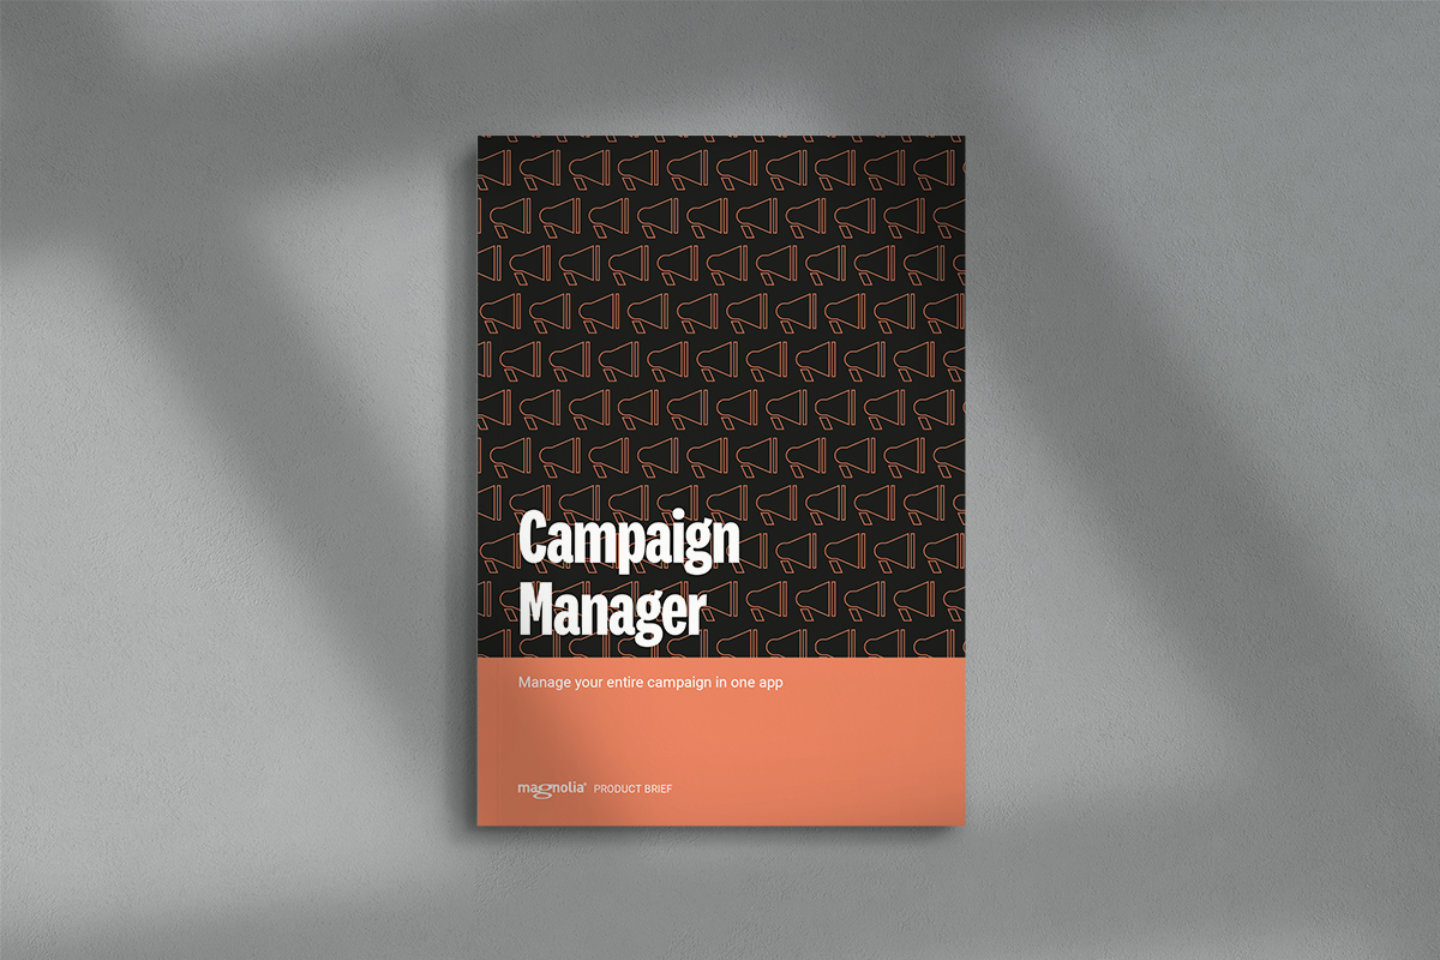 Mockup Campaign Manager